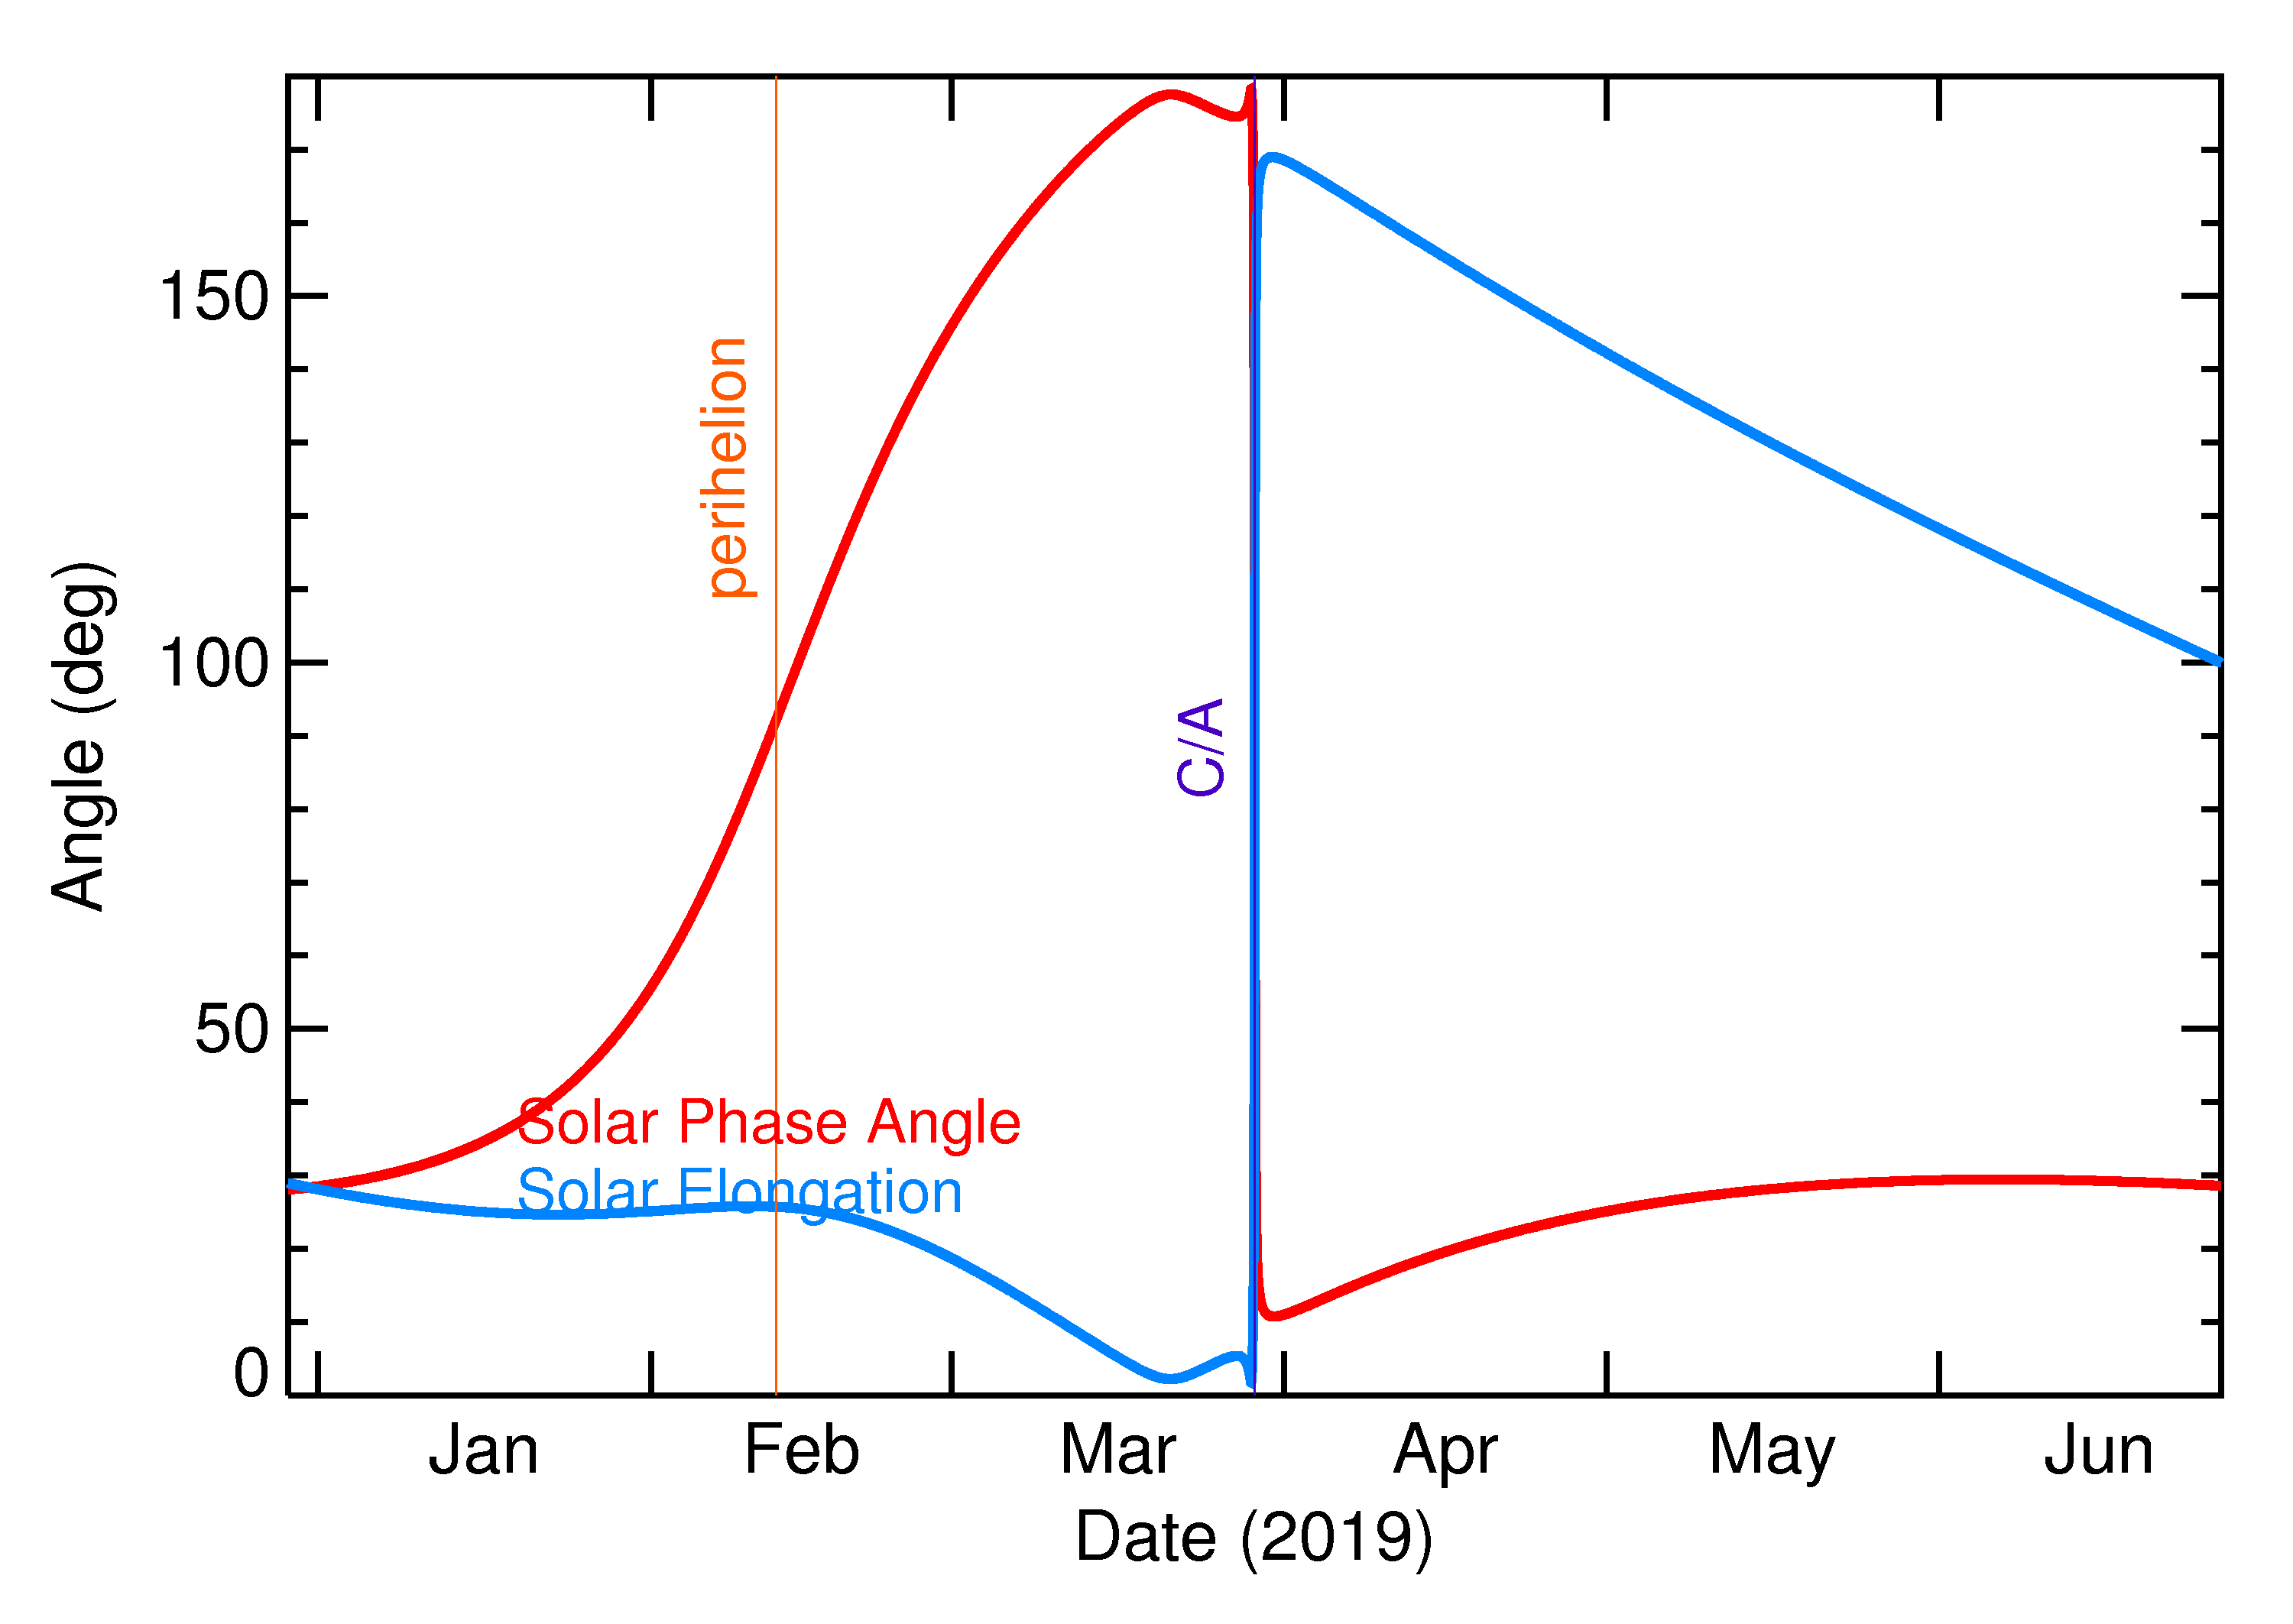 Solar Elongation and Solar Phase Angle of 2019 FC1 in the months around closest approach